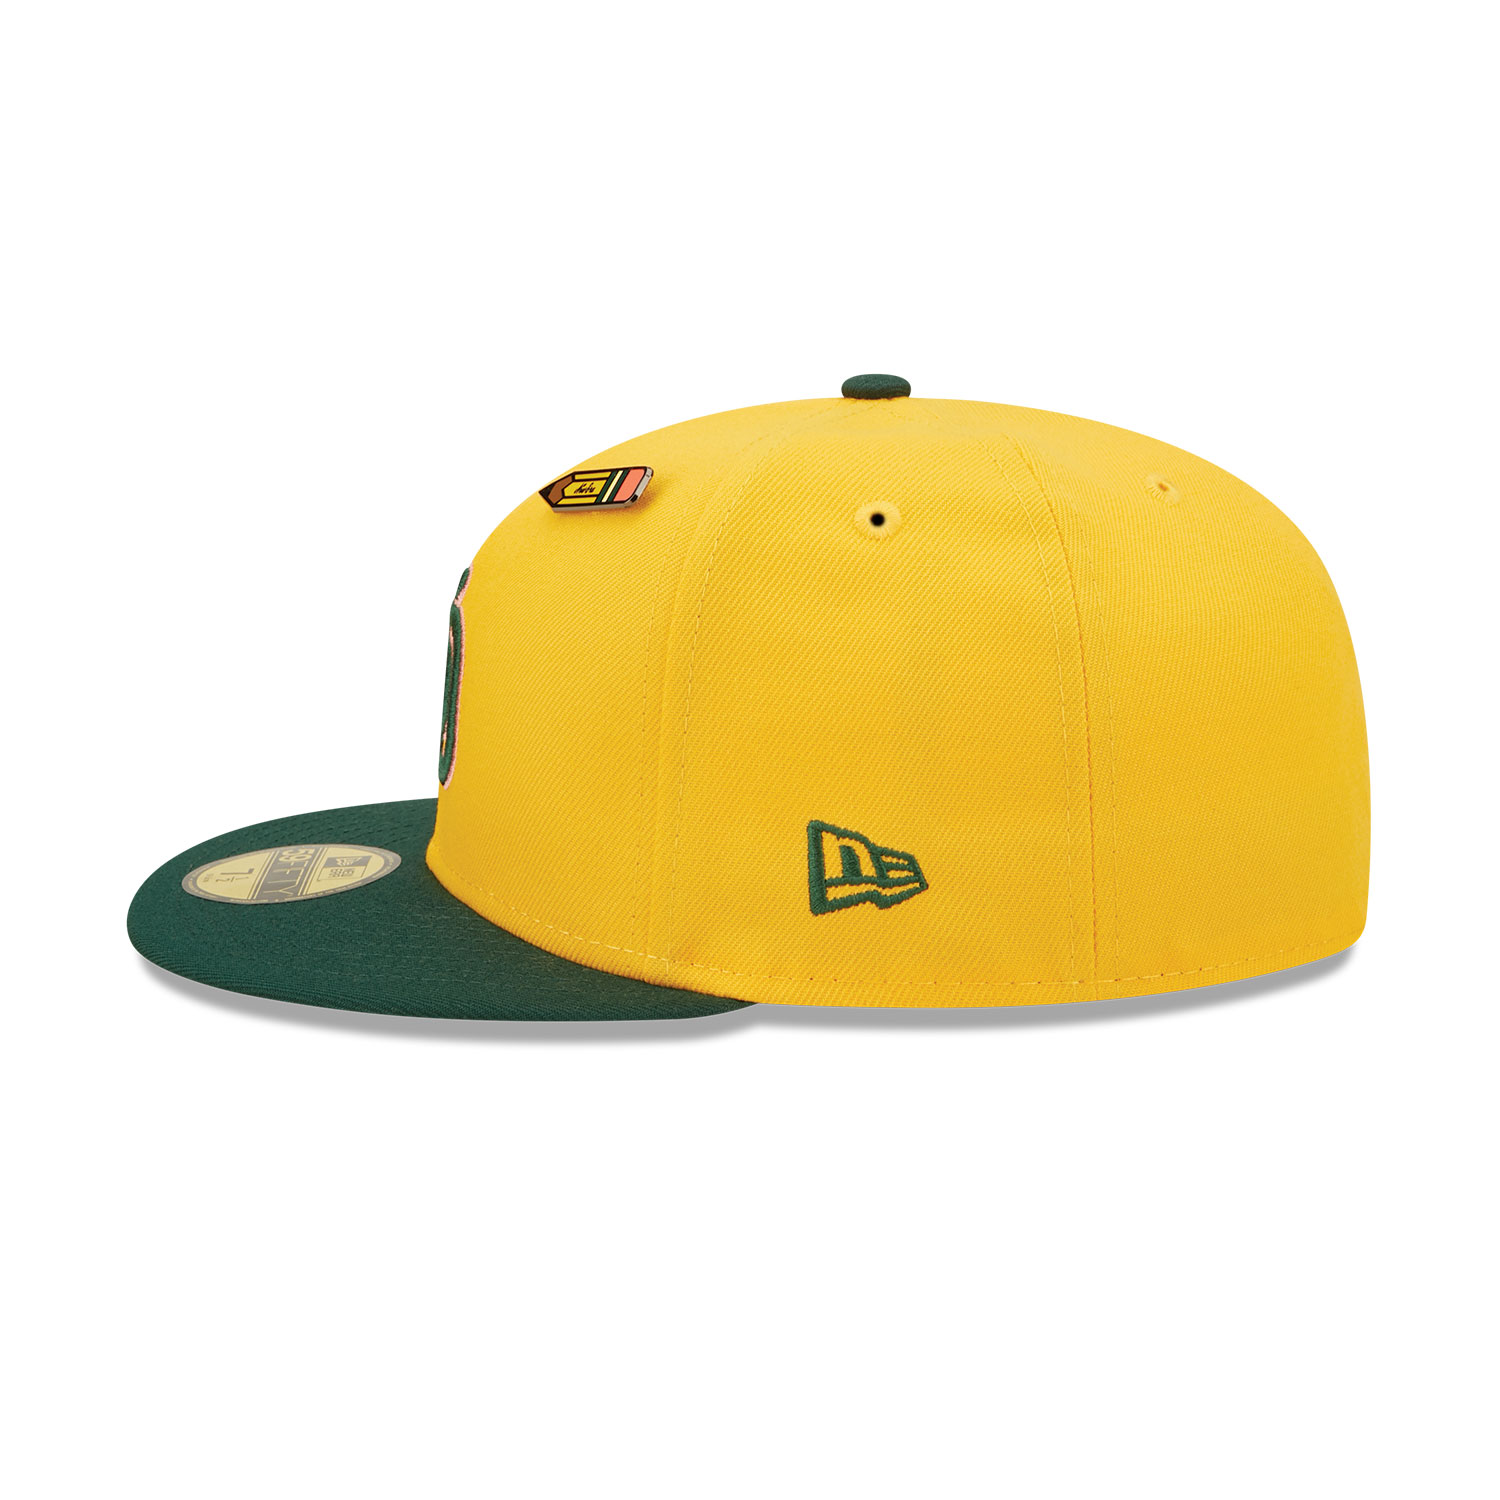 San Diego Padres Back to School Yellow 59FIFTY Fitted Cap